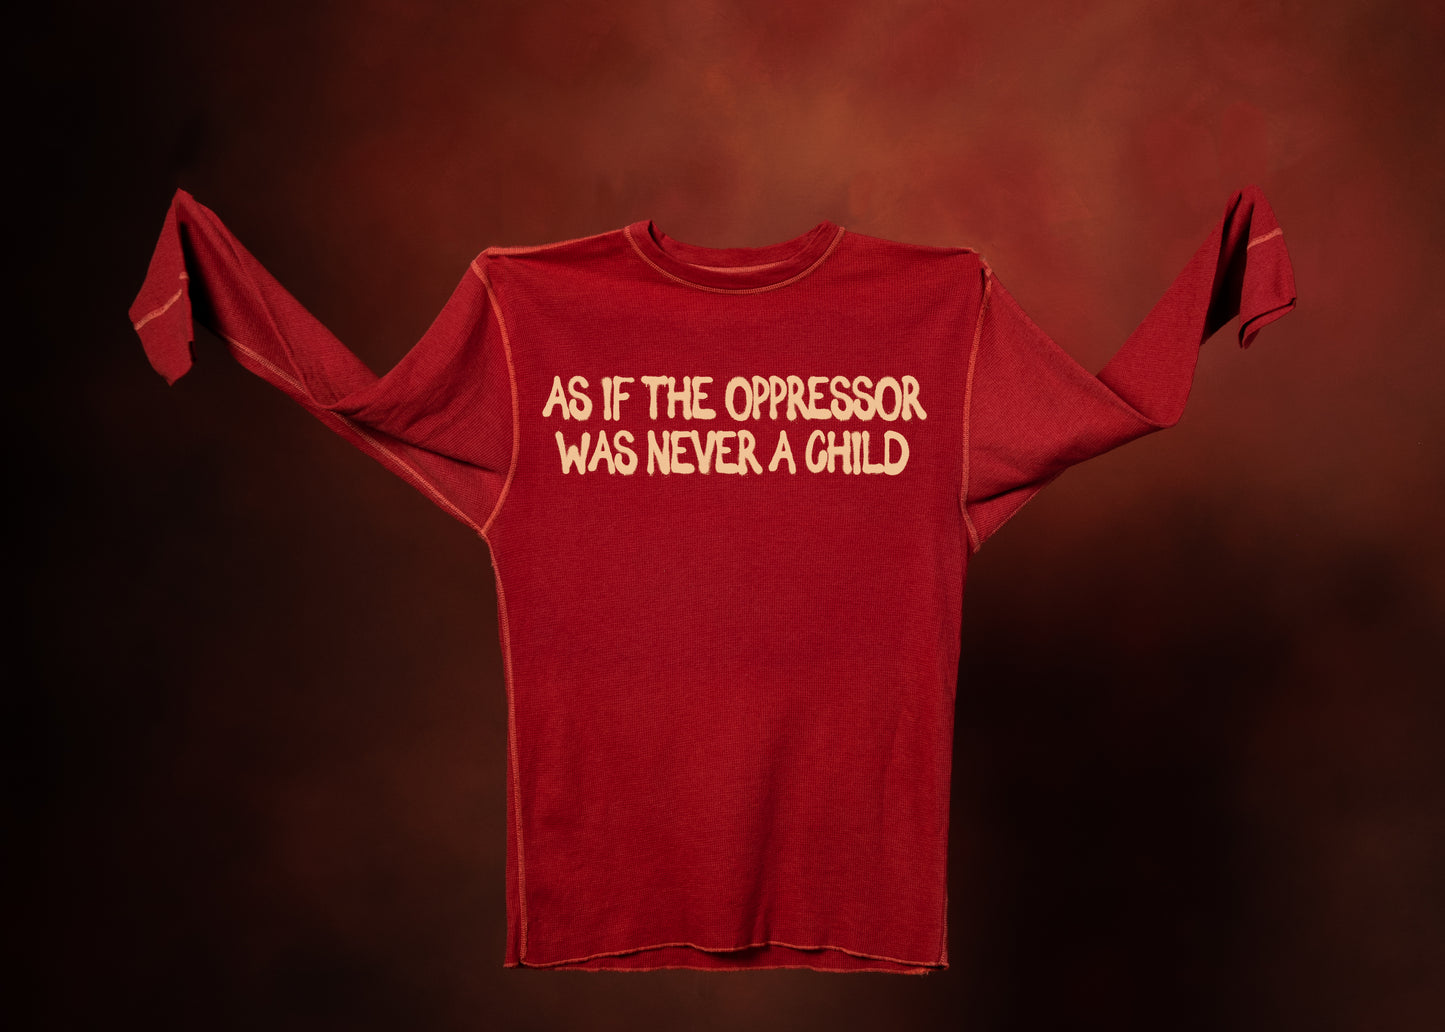 AS IF THE OPPRESSOR WAS NEVER A CHILD